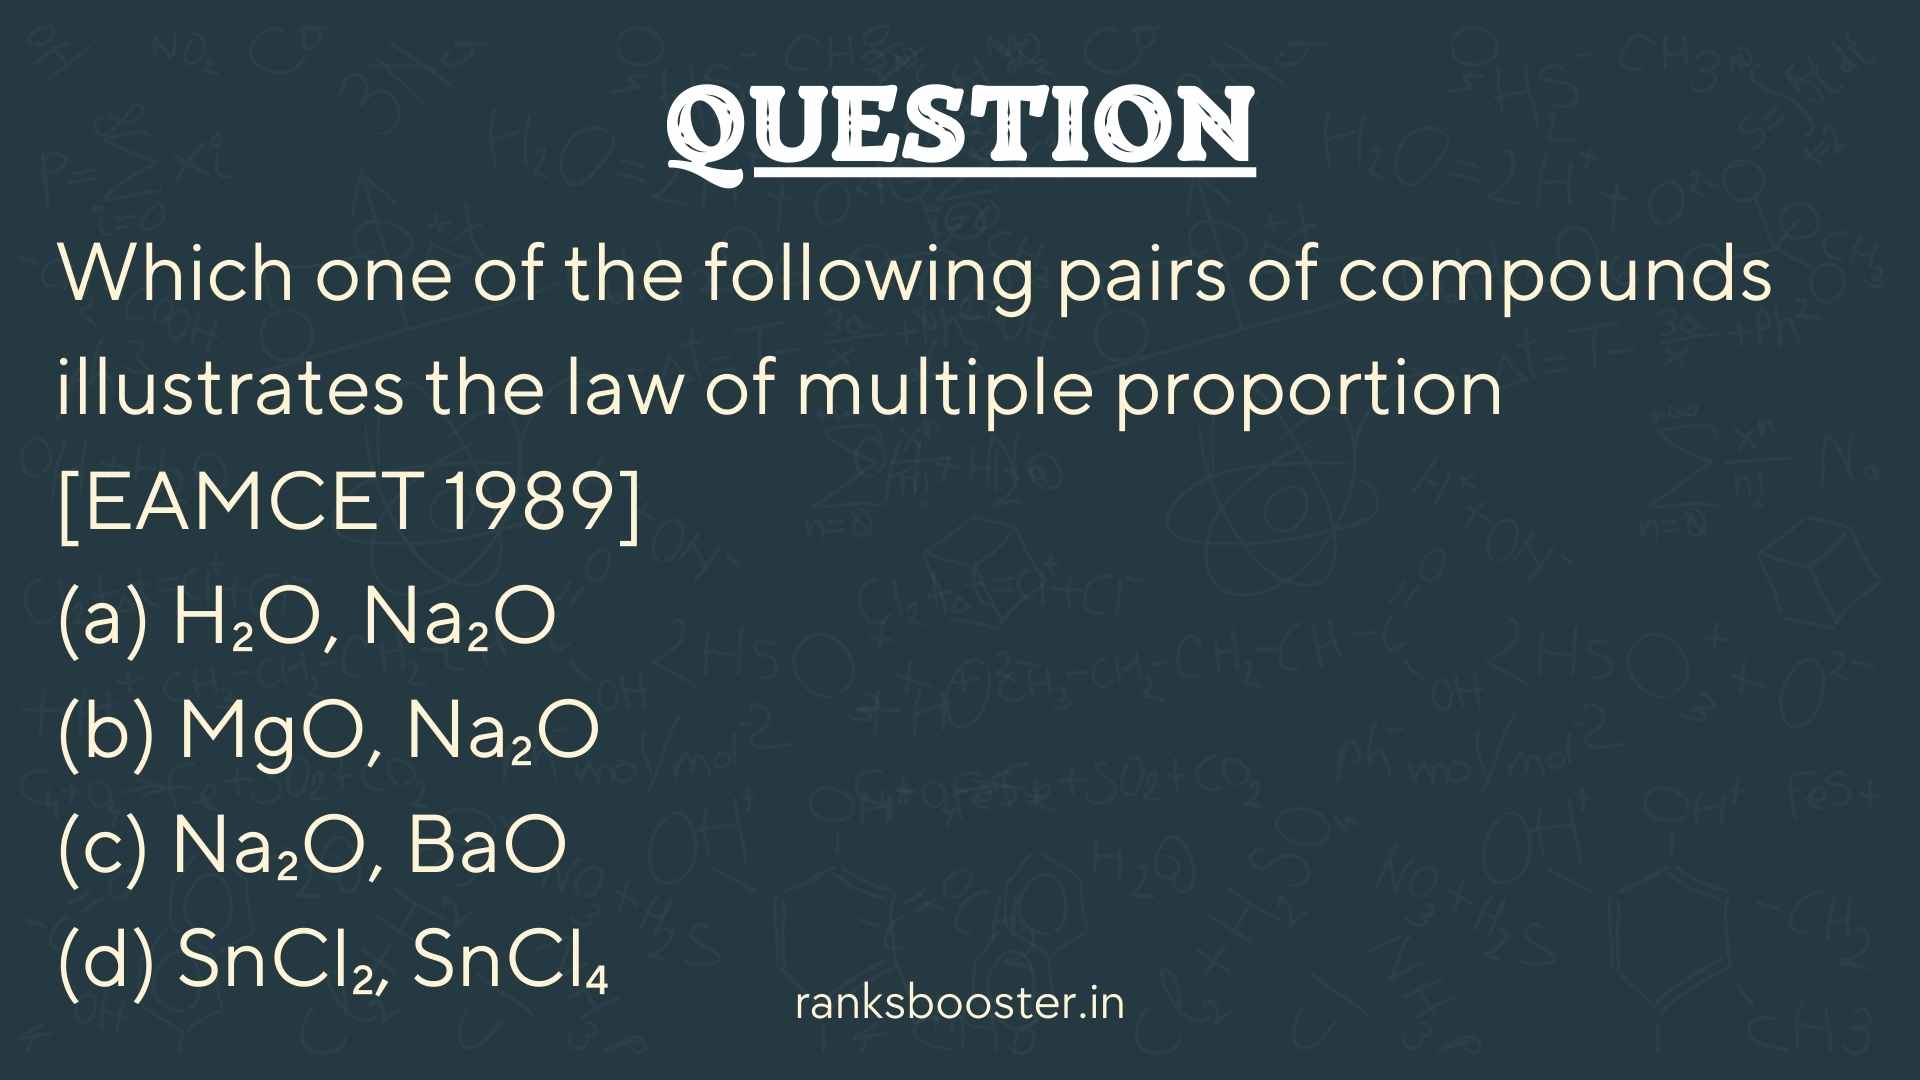 Question: Which one of the following pairs of compounds illustrates the law of multiple proportion [EAMCET 1989] (a) H₂O, Na₂O (b) MgO, Na₂O (c) Na₂O, BaO (d) SnCl₂, SnCl₄